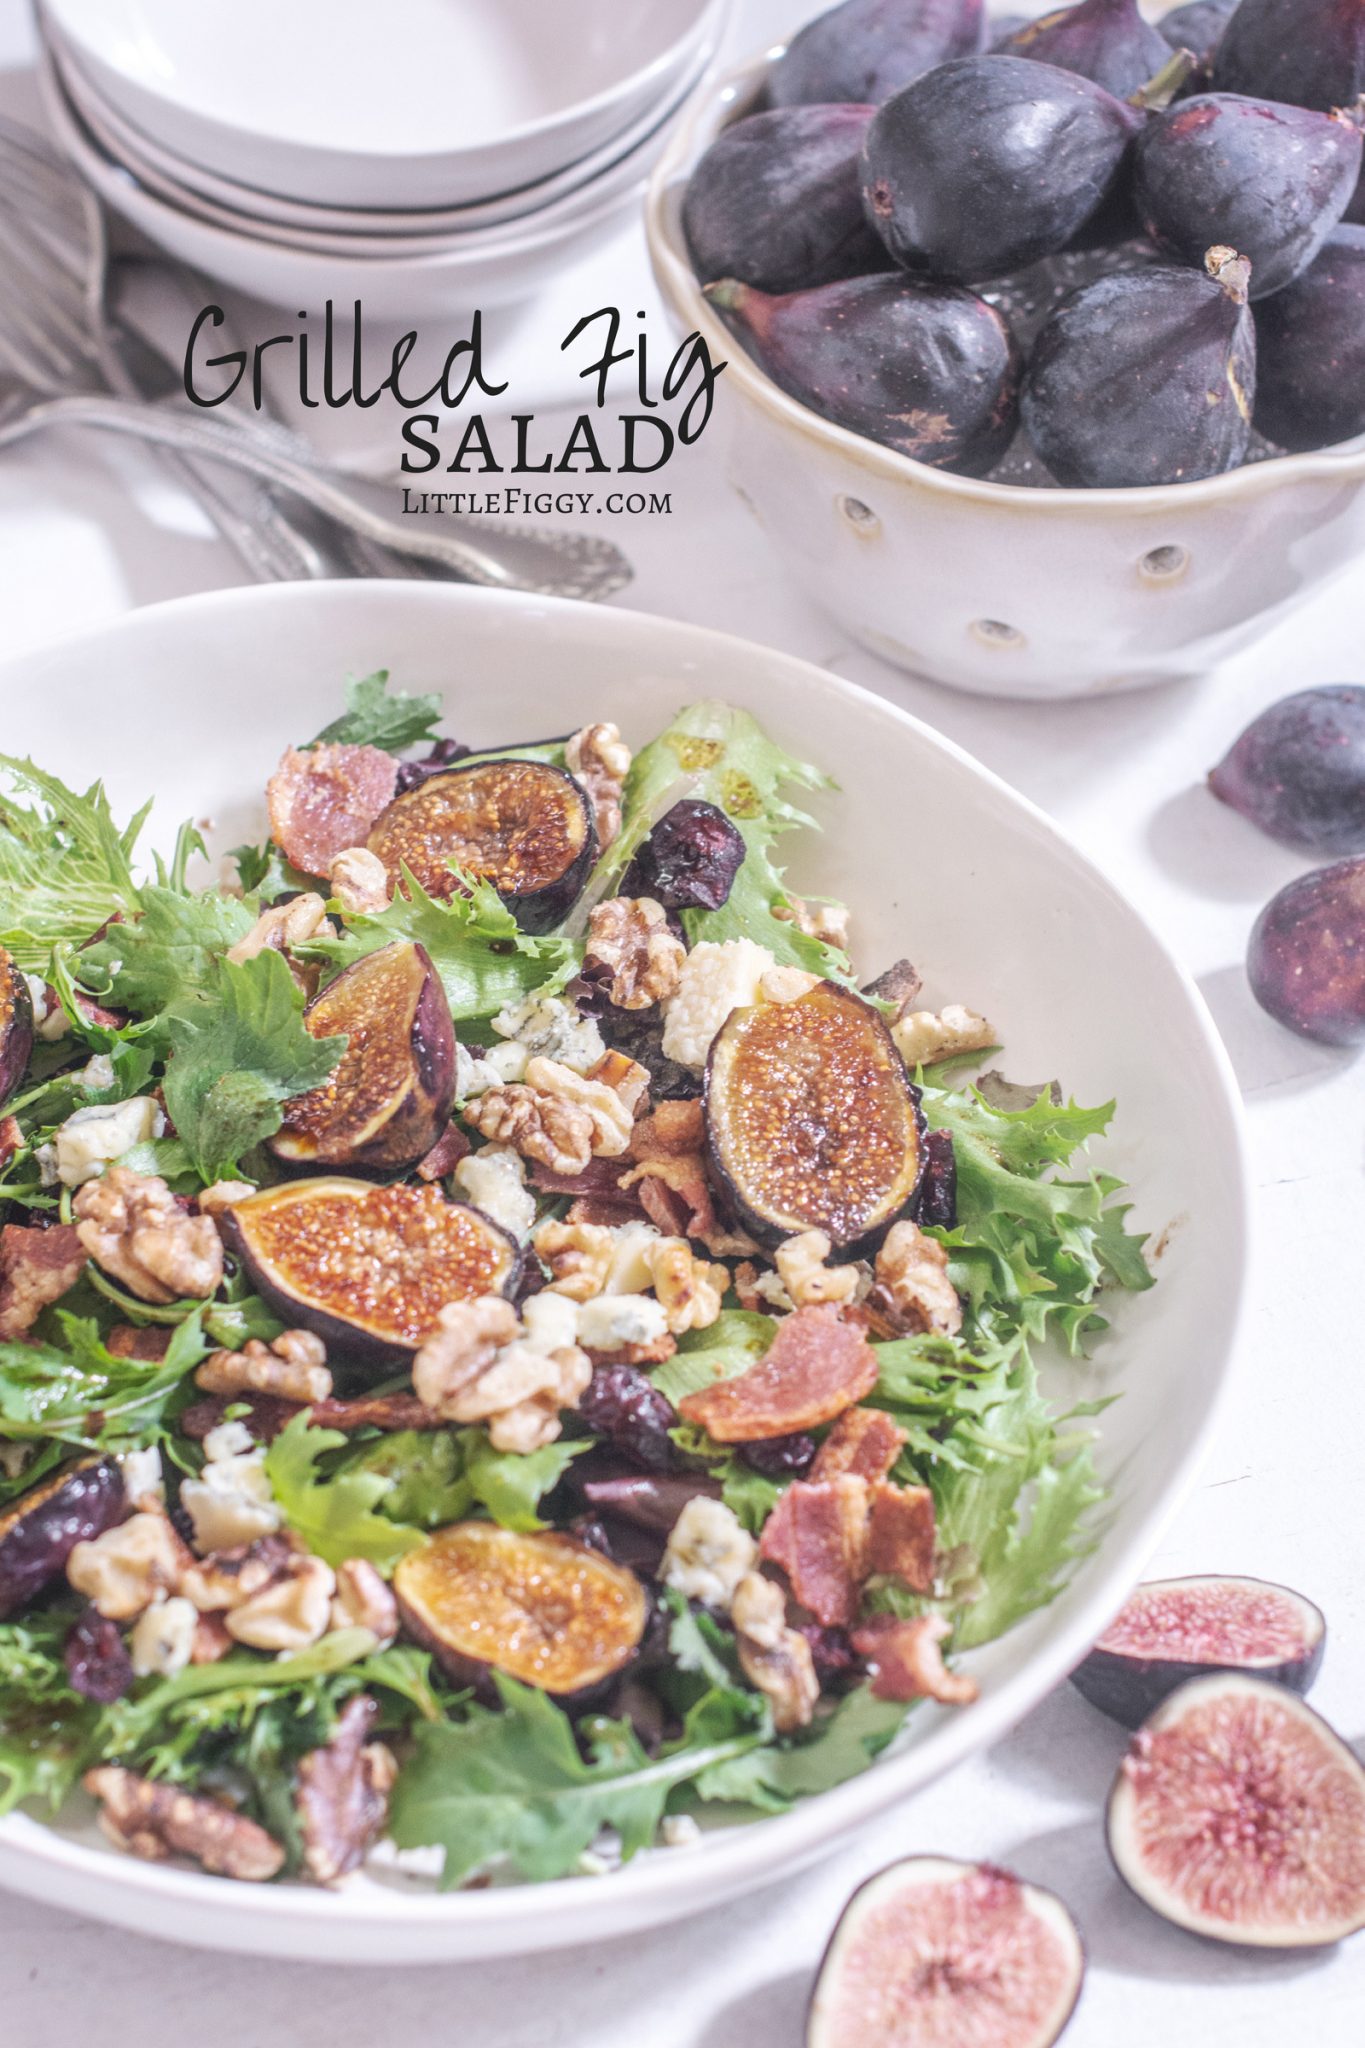 Simple to make, Grilled Fig Salad, perfect to serve as a side for dinner or simple lunch.